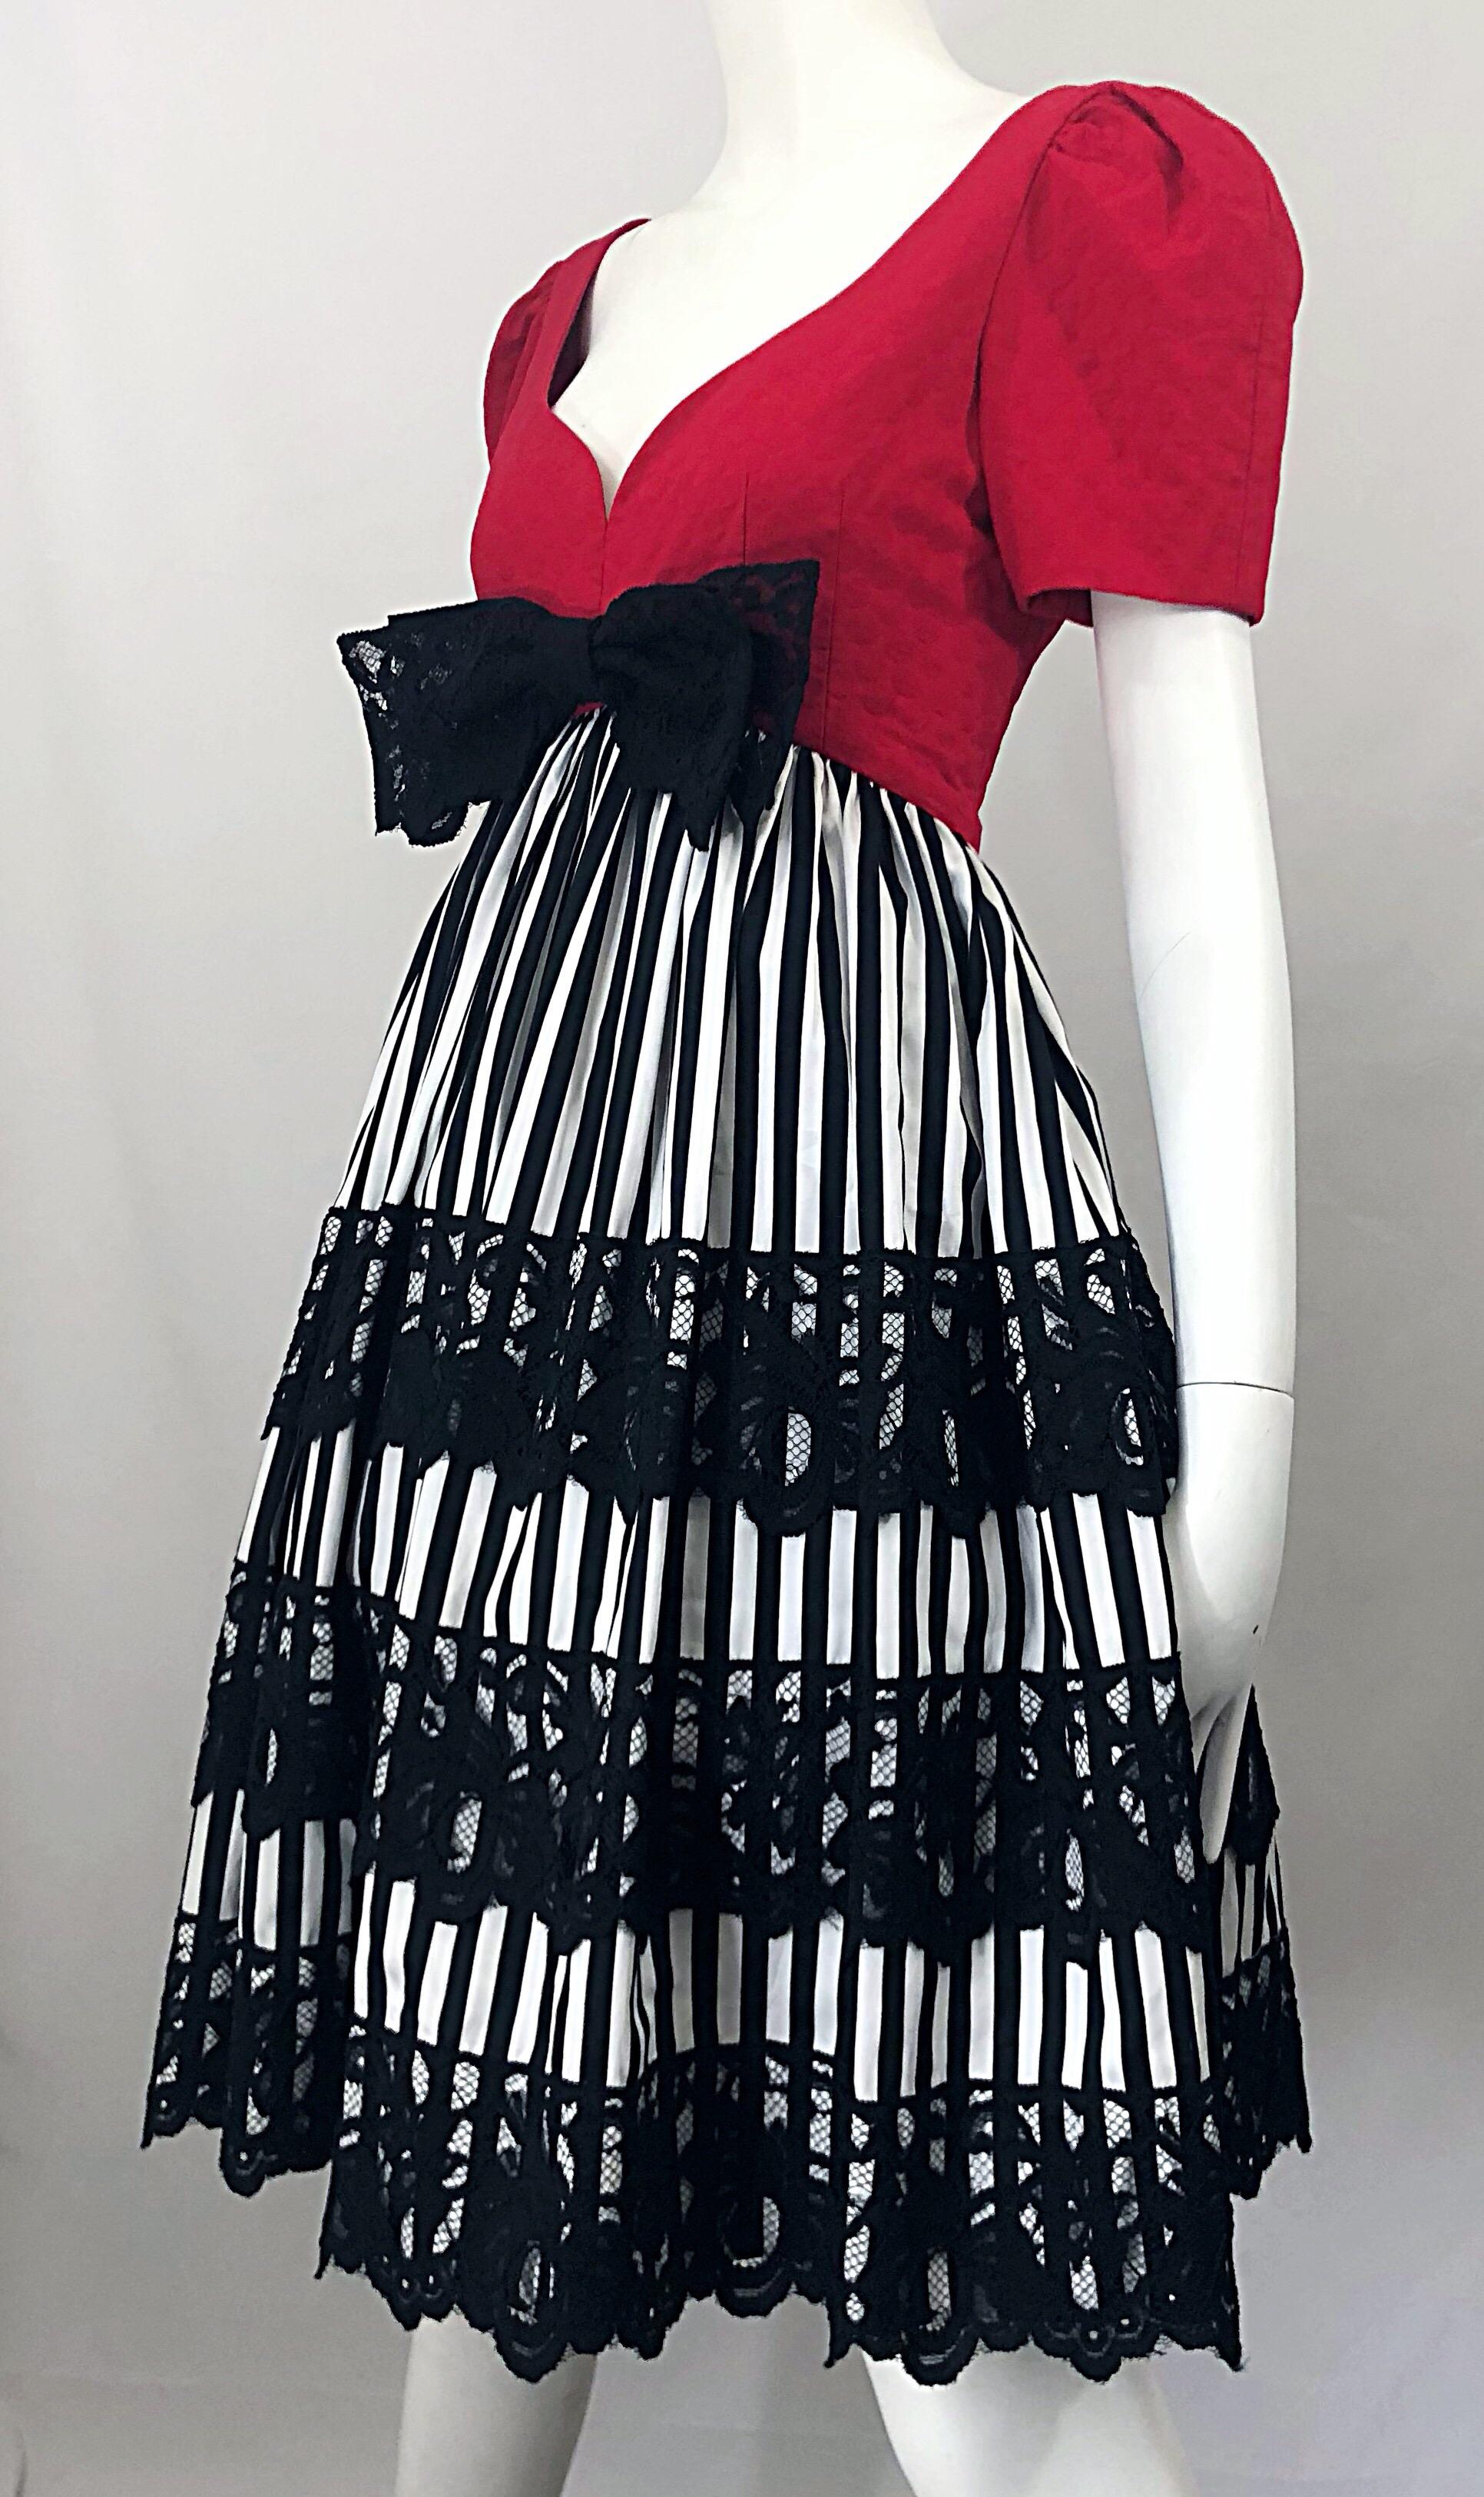 Vintage Adele Simpson 1980s Red Black White Fit n' Flare Empire Bow Lace Dress For Sale 7